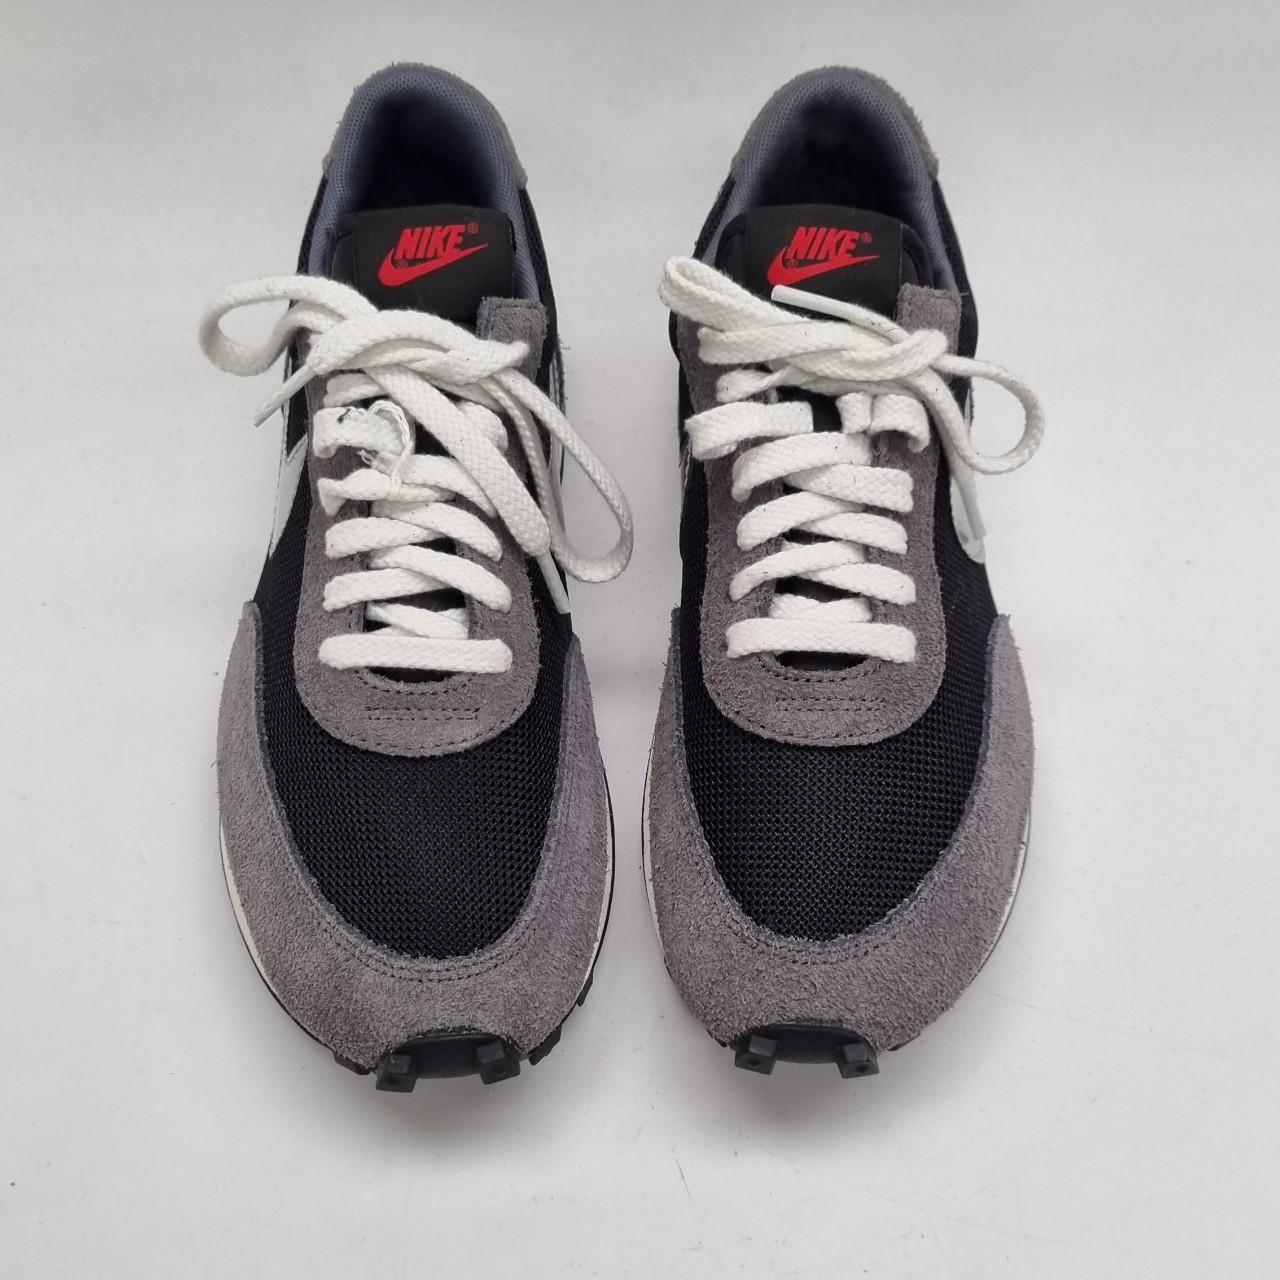 Nike Women's Grey and Black Trainers | Depop